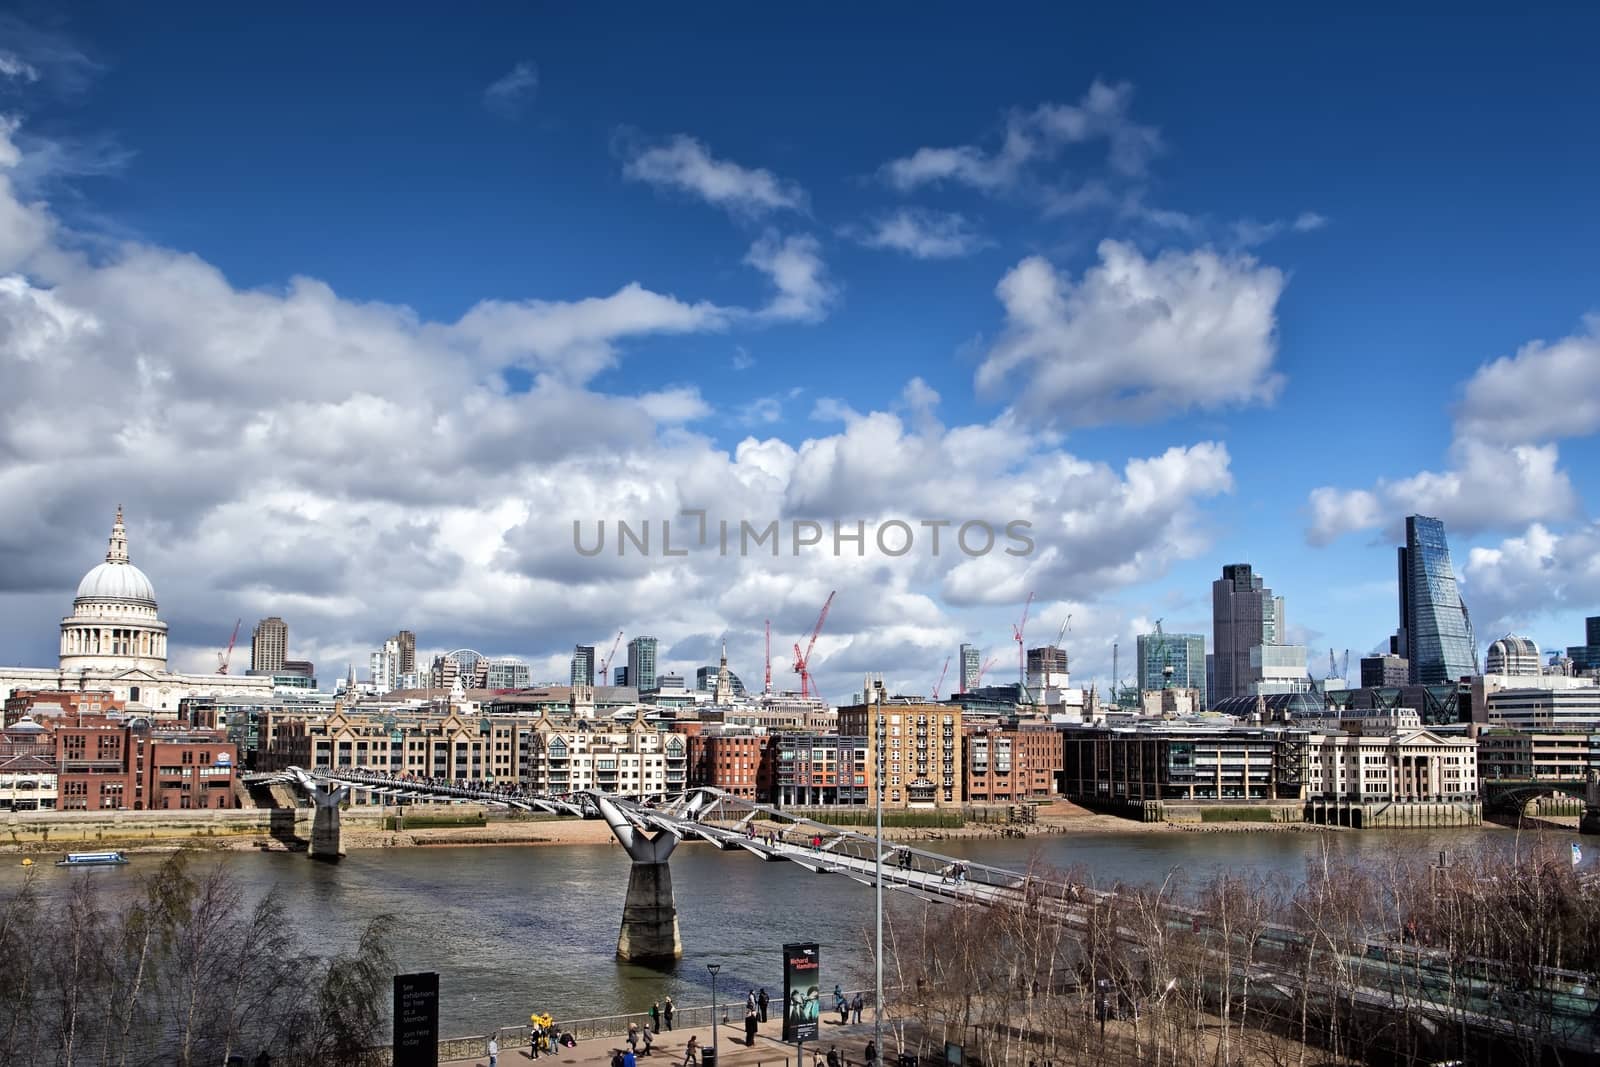 St Paul's Cathedral and Millennium Bridge in London by mitakag